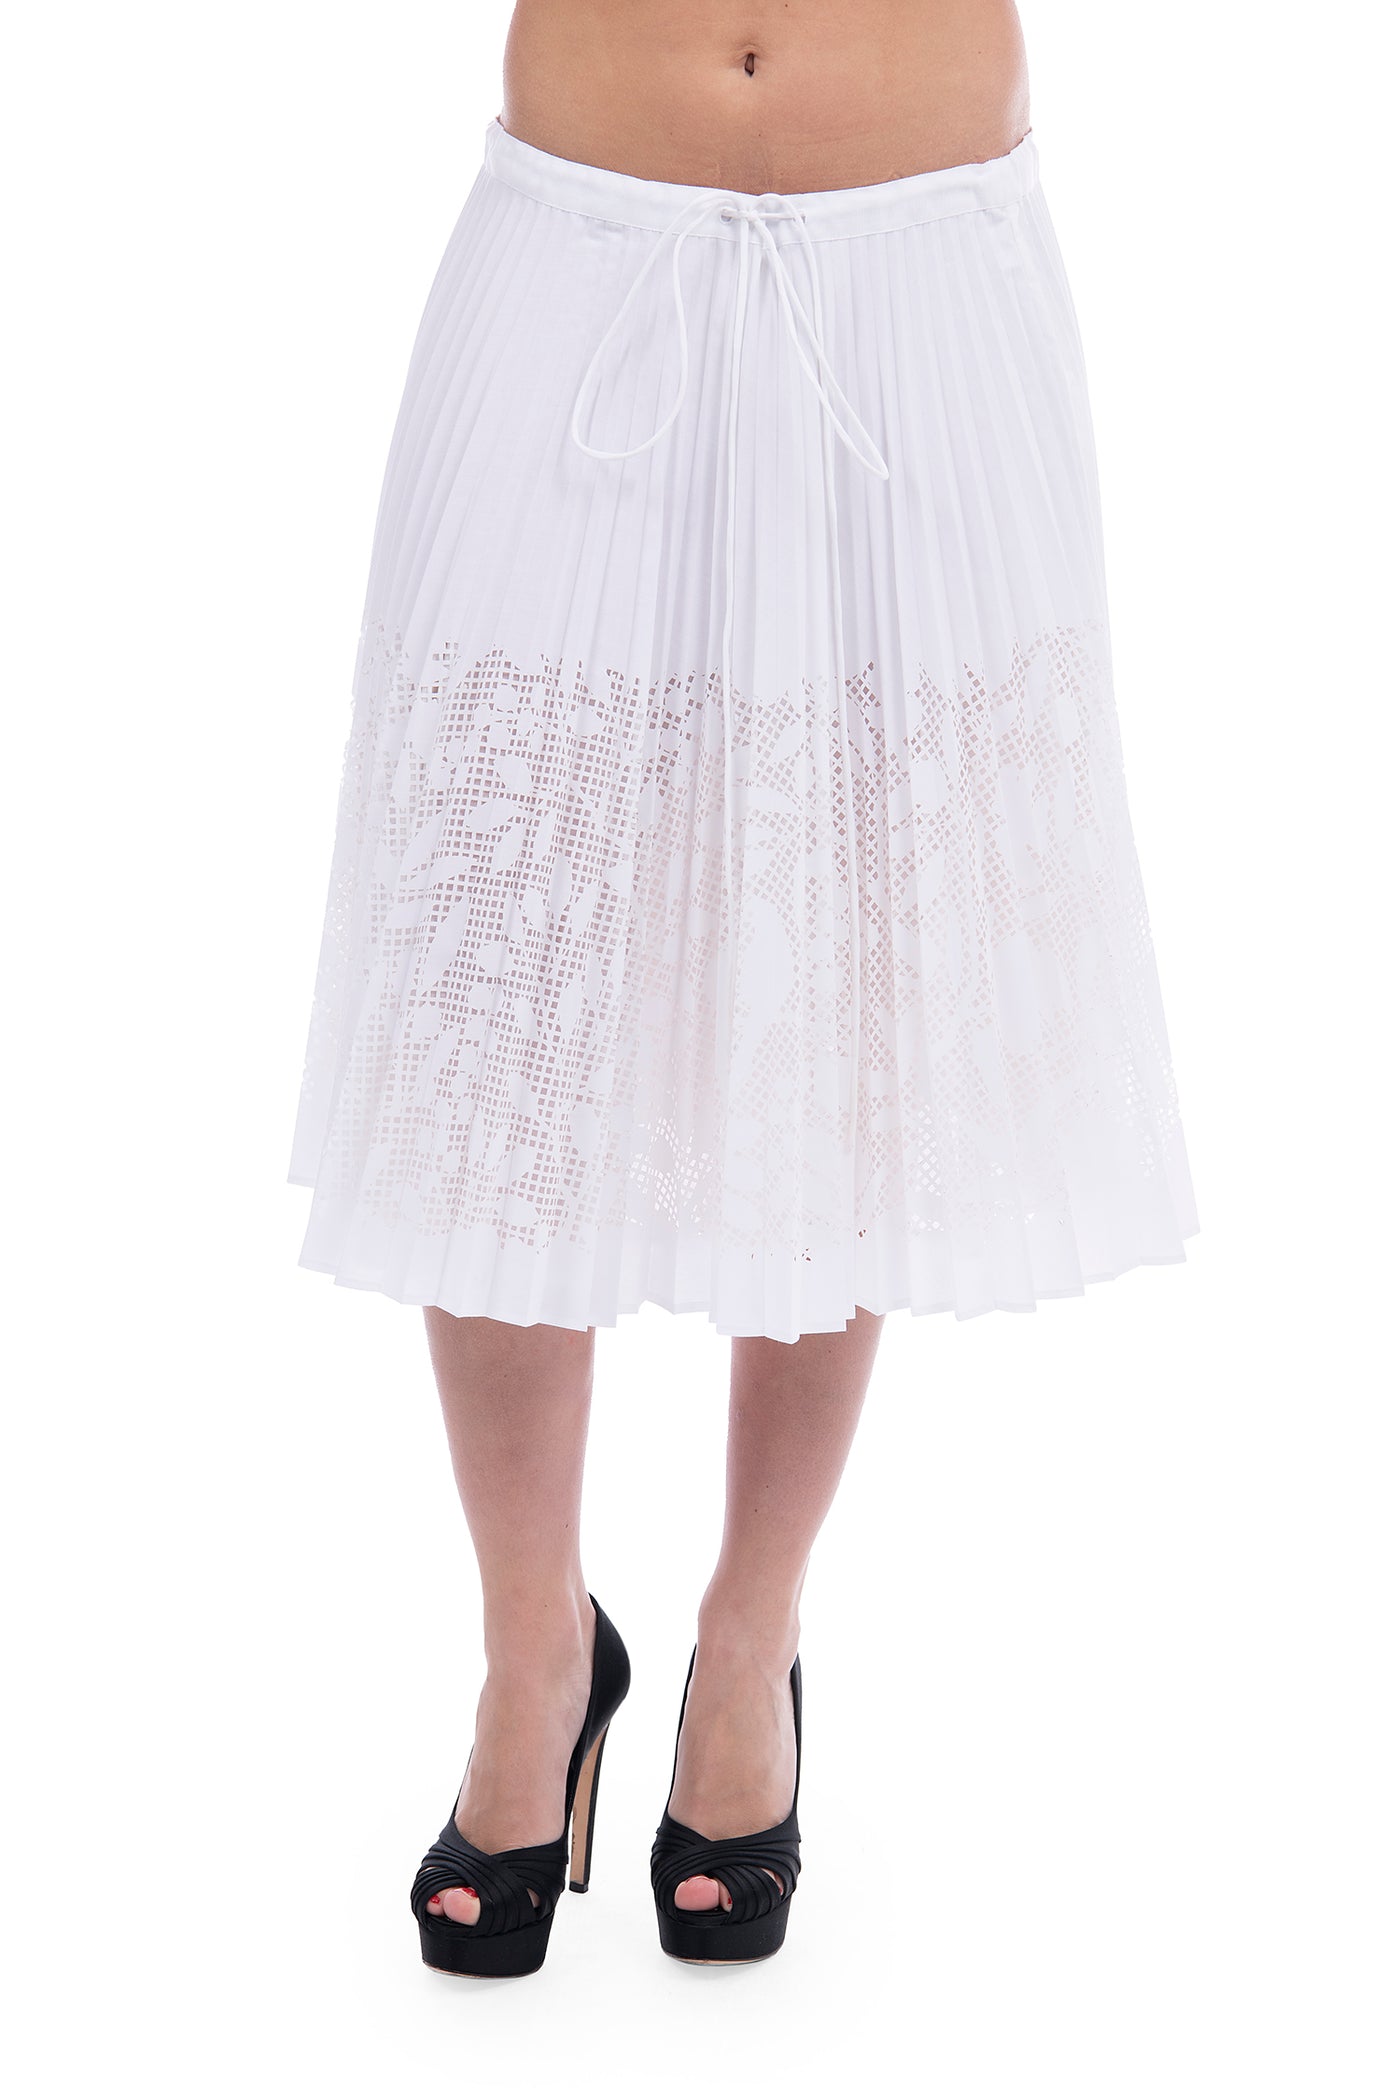 Veronique Branquinho white pleated skirt with laser cutouts